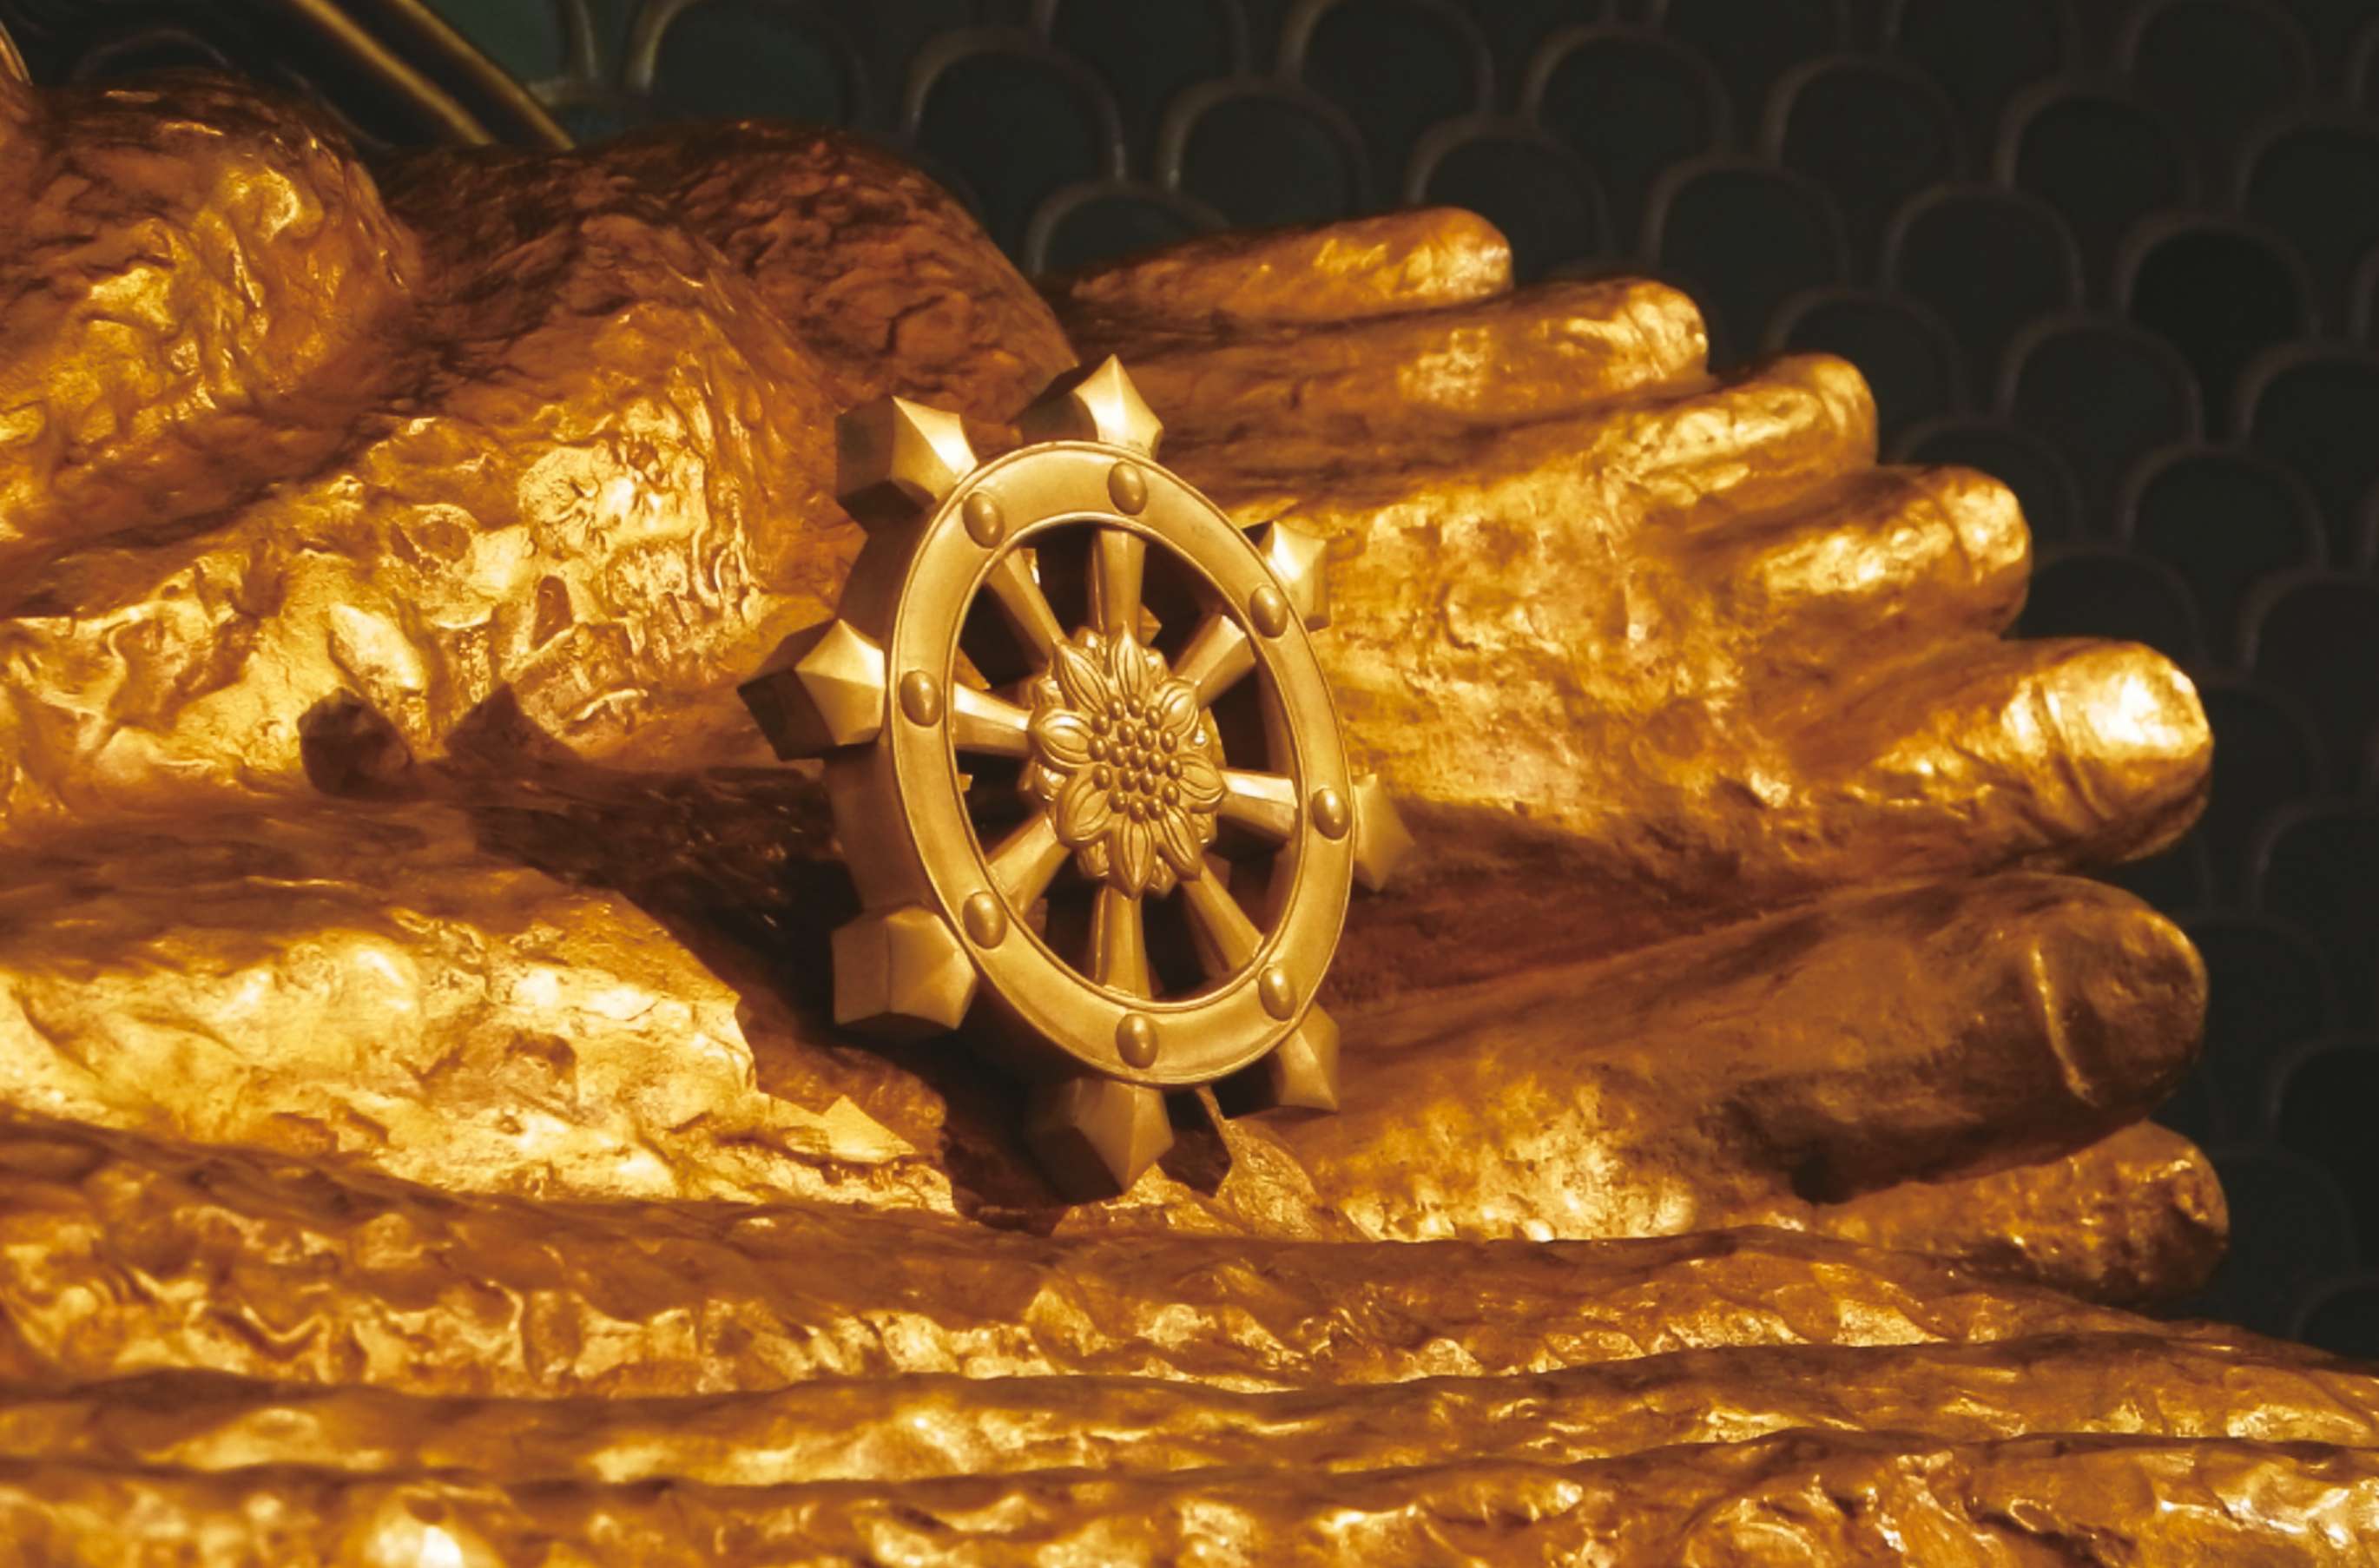 A photograph at close range of the feet of a large, golden Nirvana Buddha statue, showing in detail the hand-sculpted surface of the feet and a Dharma wheel placed in front of them.